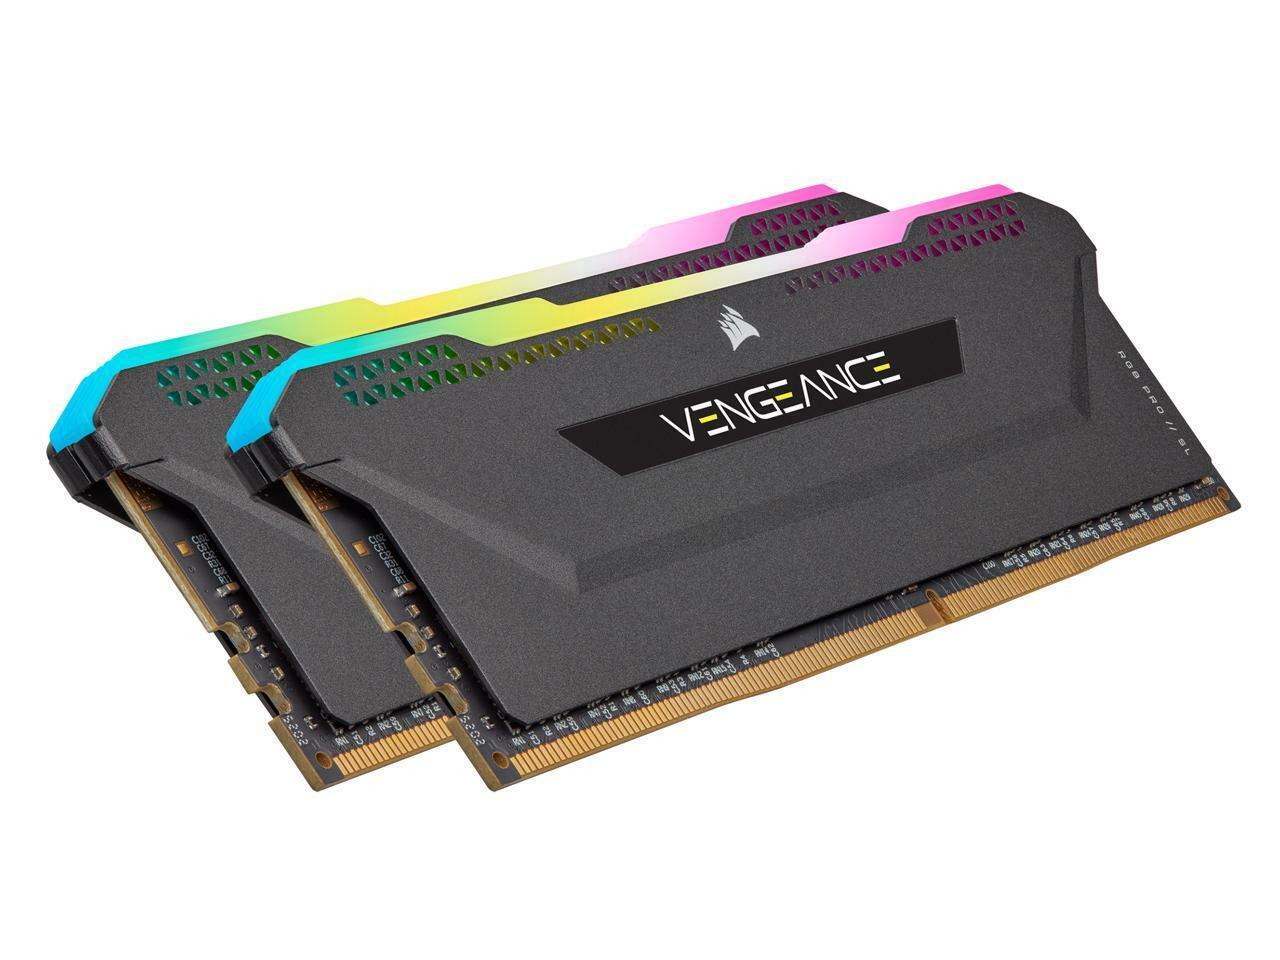 CORSAIR Vengeance RGB Pro SL 32GB (2 x 16GB) 288-Pin DDR4 SDRAM DDR4 3600 (PC4 2. Available Now for 99.99